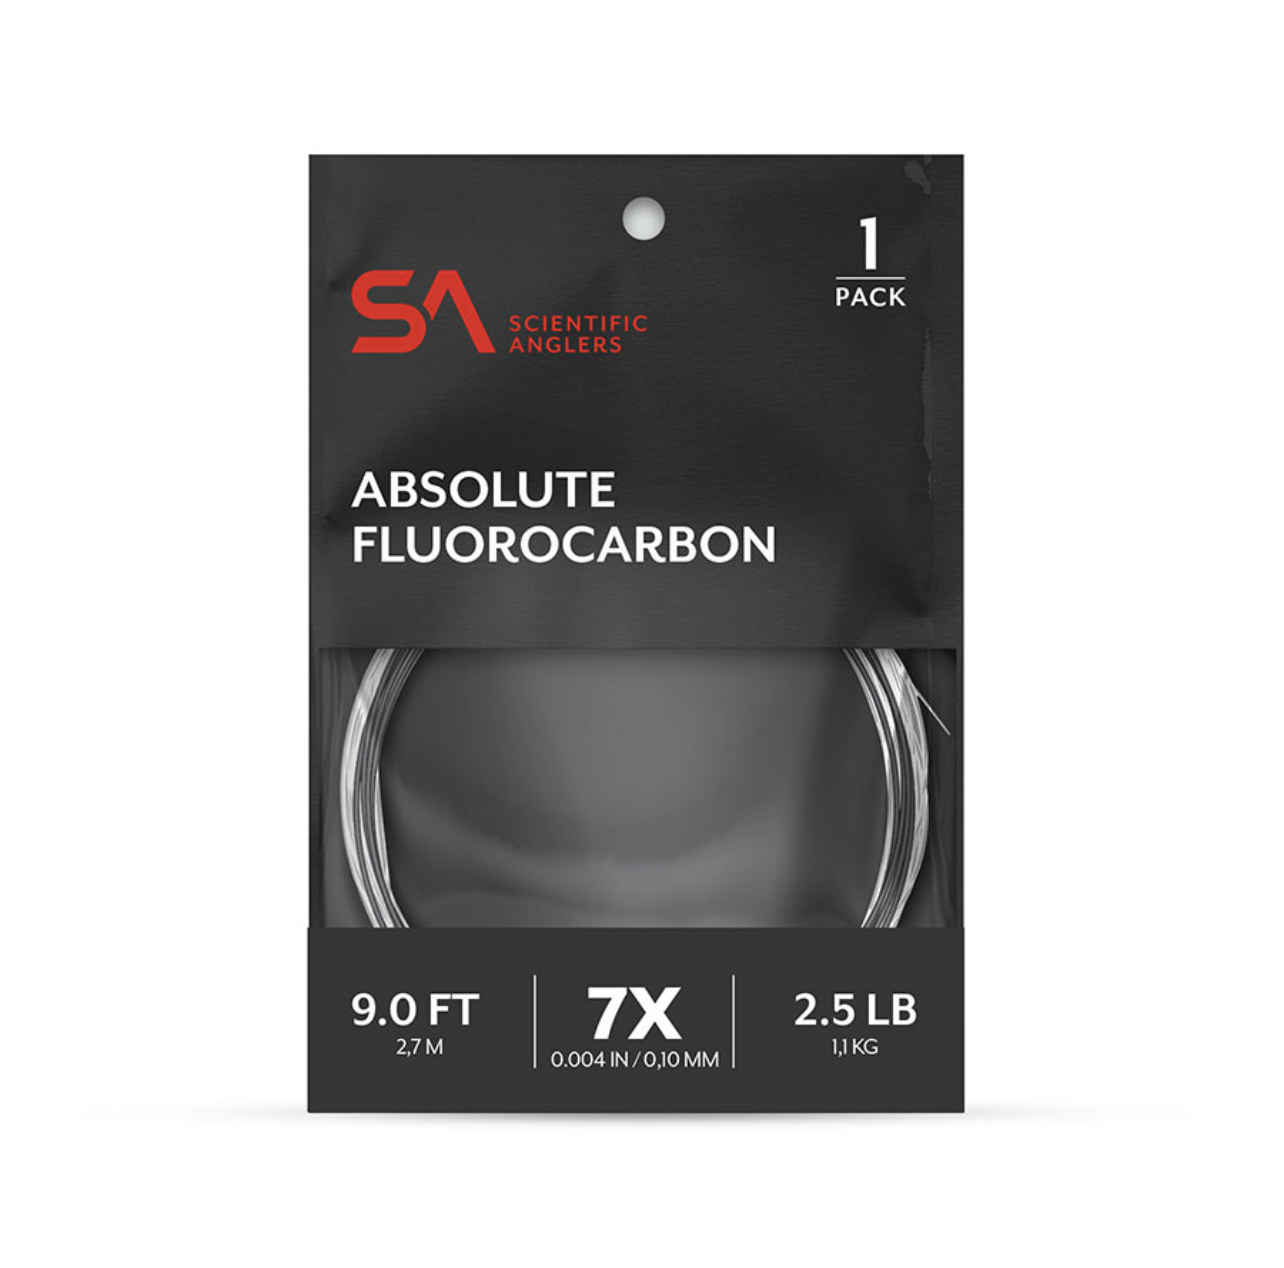 Absolute Fluorocarbon